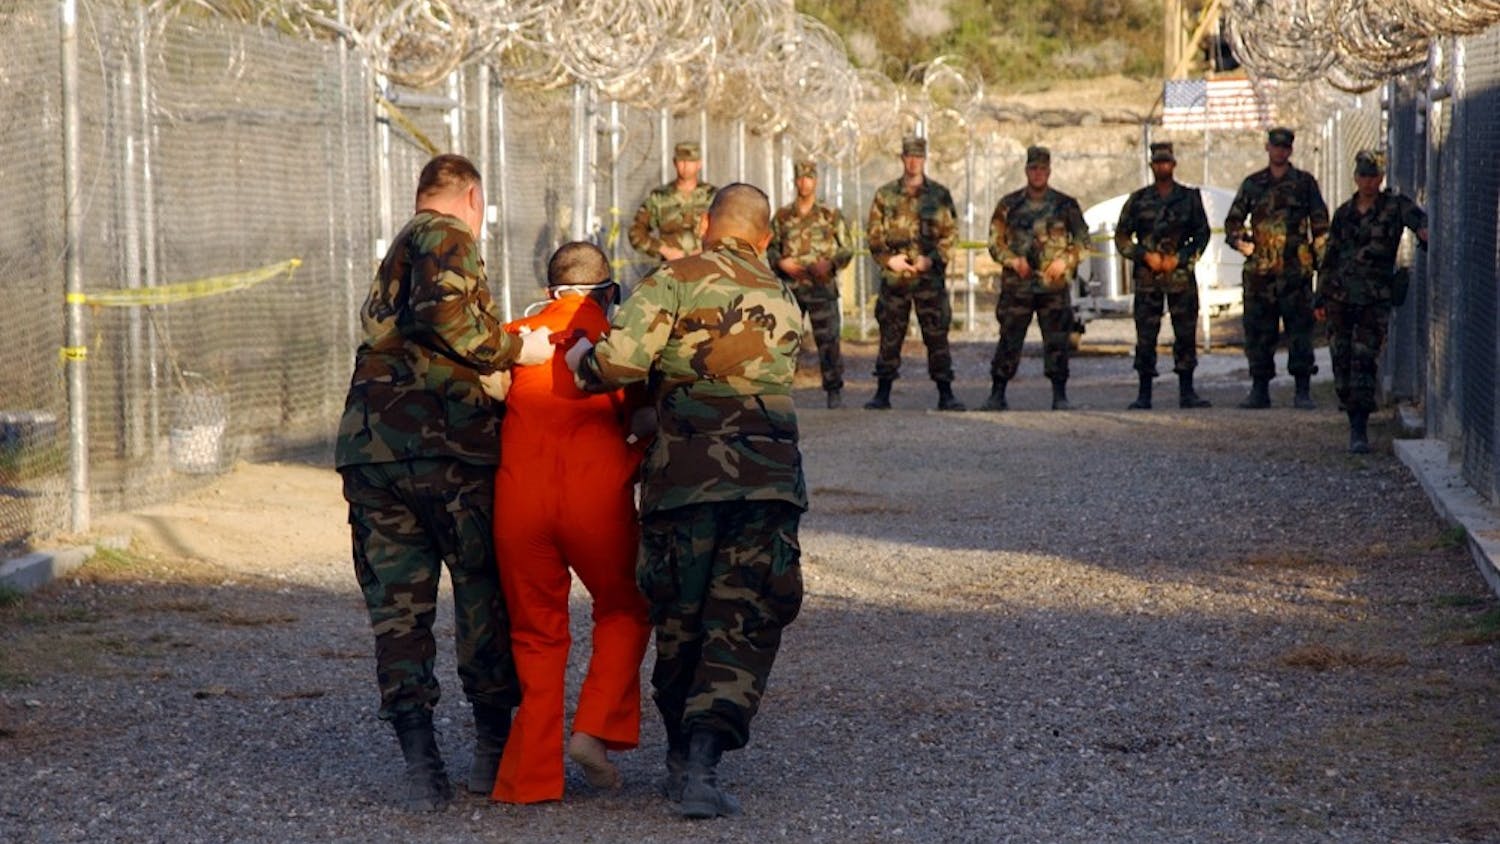 Taliban and al-Qaida detainees in orange jumpsuits sit in a holding area during in-processing to the temporary detention facility on Jan. 18, 2002, in Guantanamo Bay, Cuba. The Senate Select Committee on Intelligence released a report on the CIA's interrogation practices. The report said the CIA misled Americans and government policymakers about the effectiveness of the program that was secretly put into place after the 9/11 terror attacks. (Shane T. McCoy/ZUMA/TNS) 